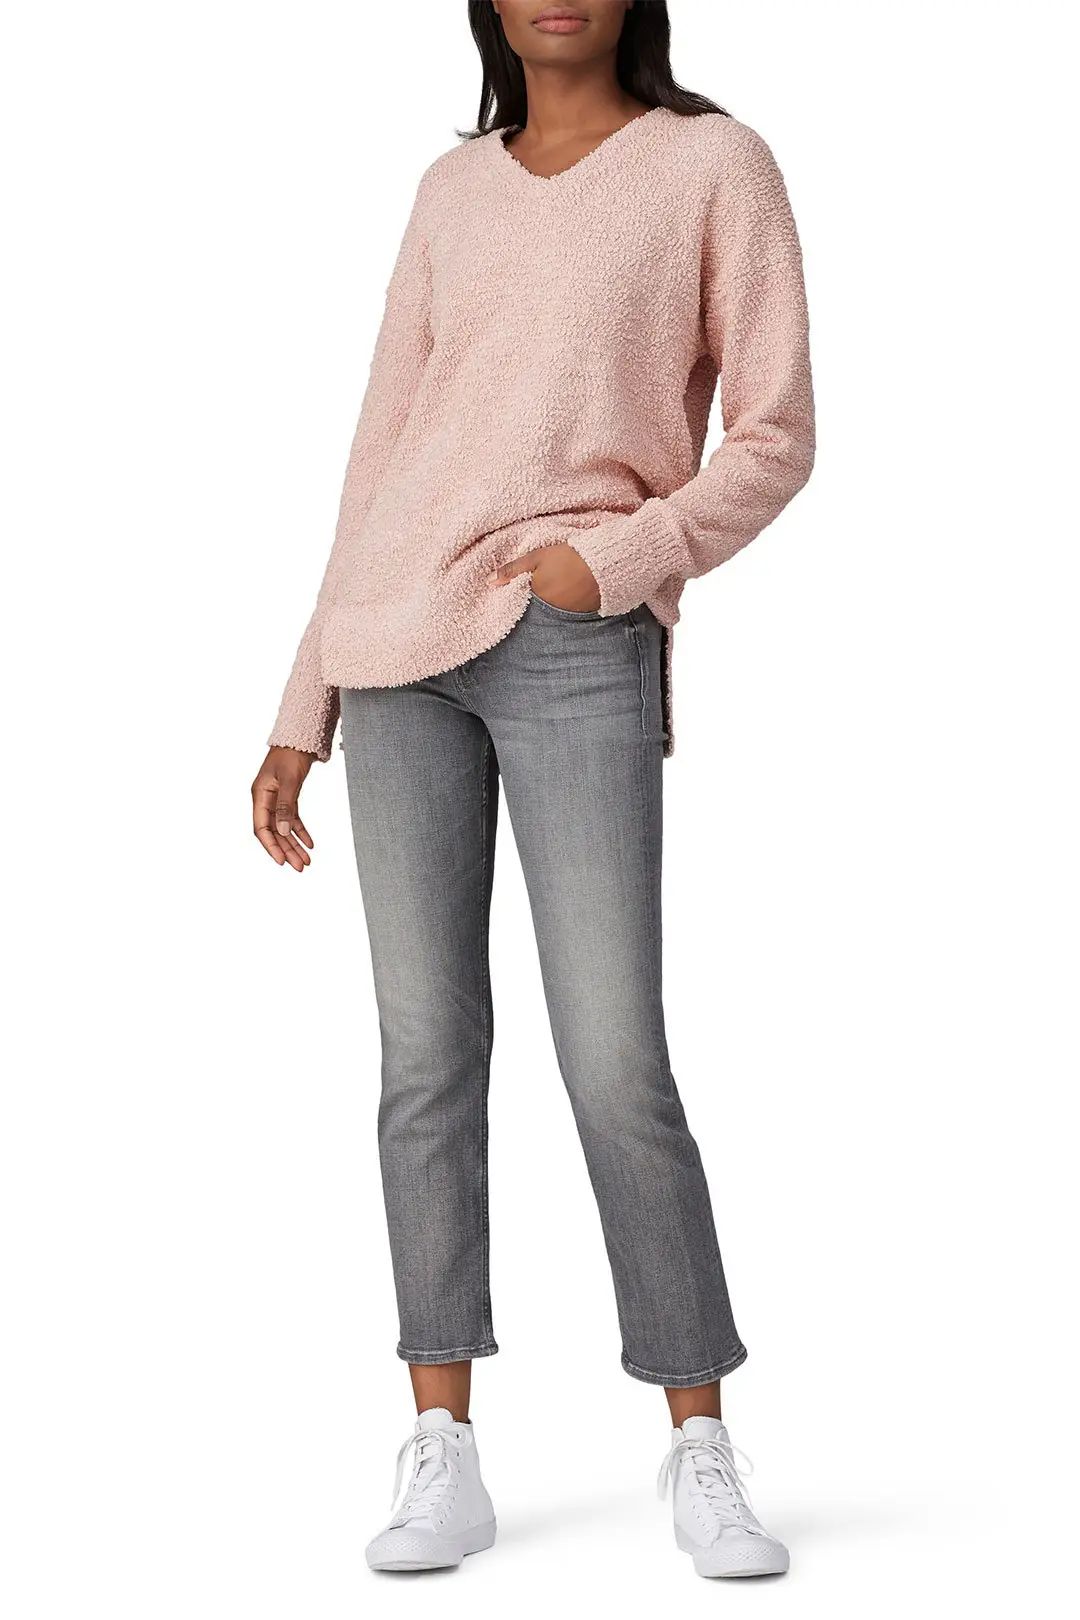 Sanctuary V-Neck Teddy Sweater | Rent The Runway